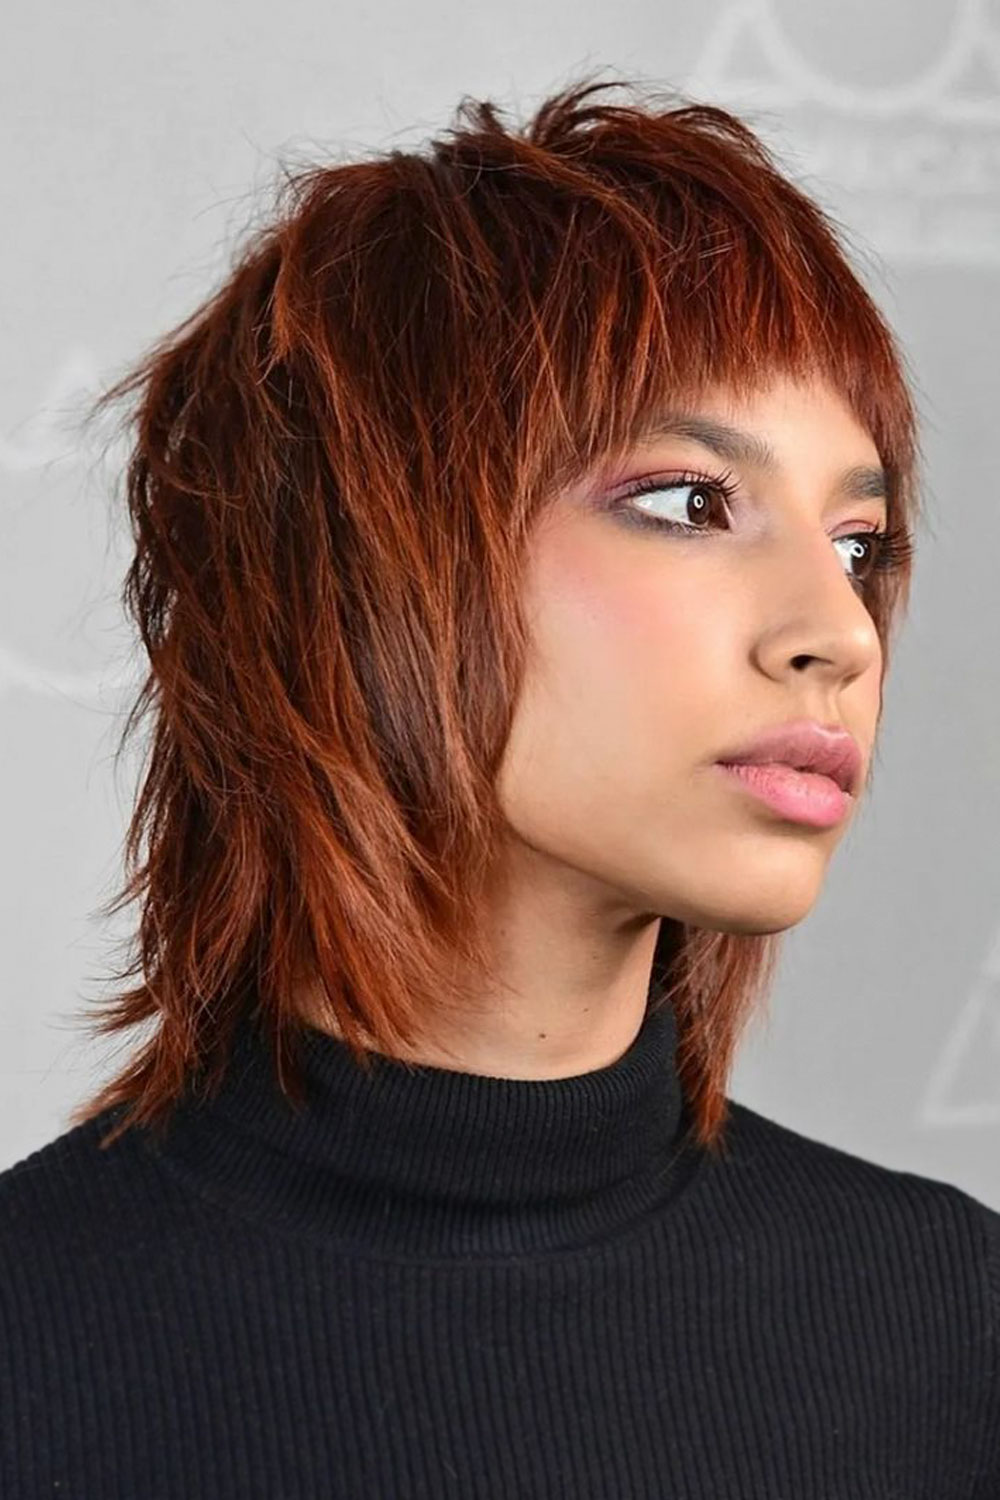 This bang focuses more on texture and unequal layers with diverse lengths